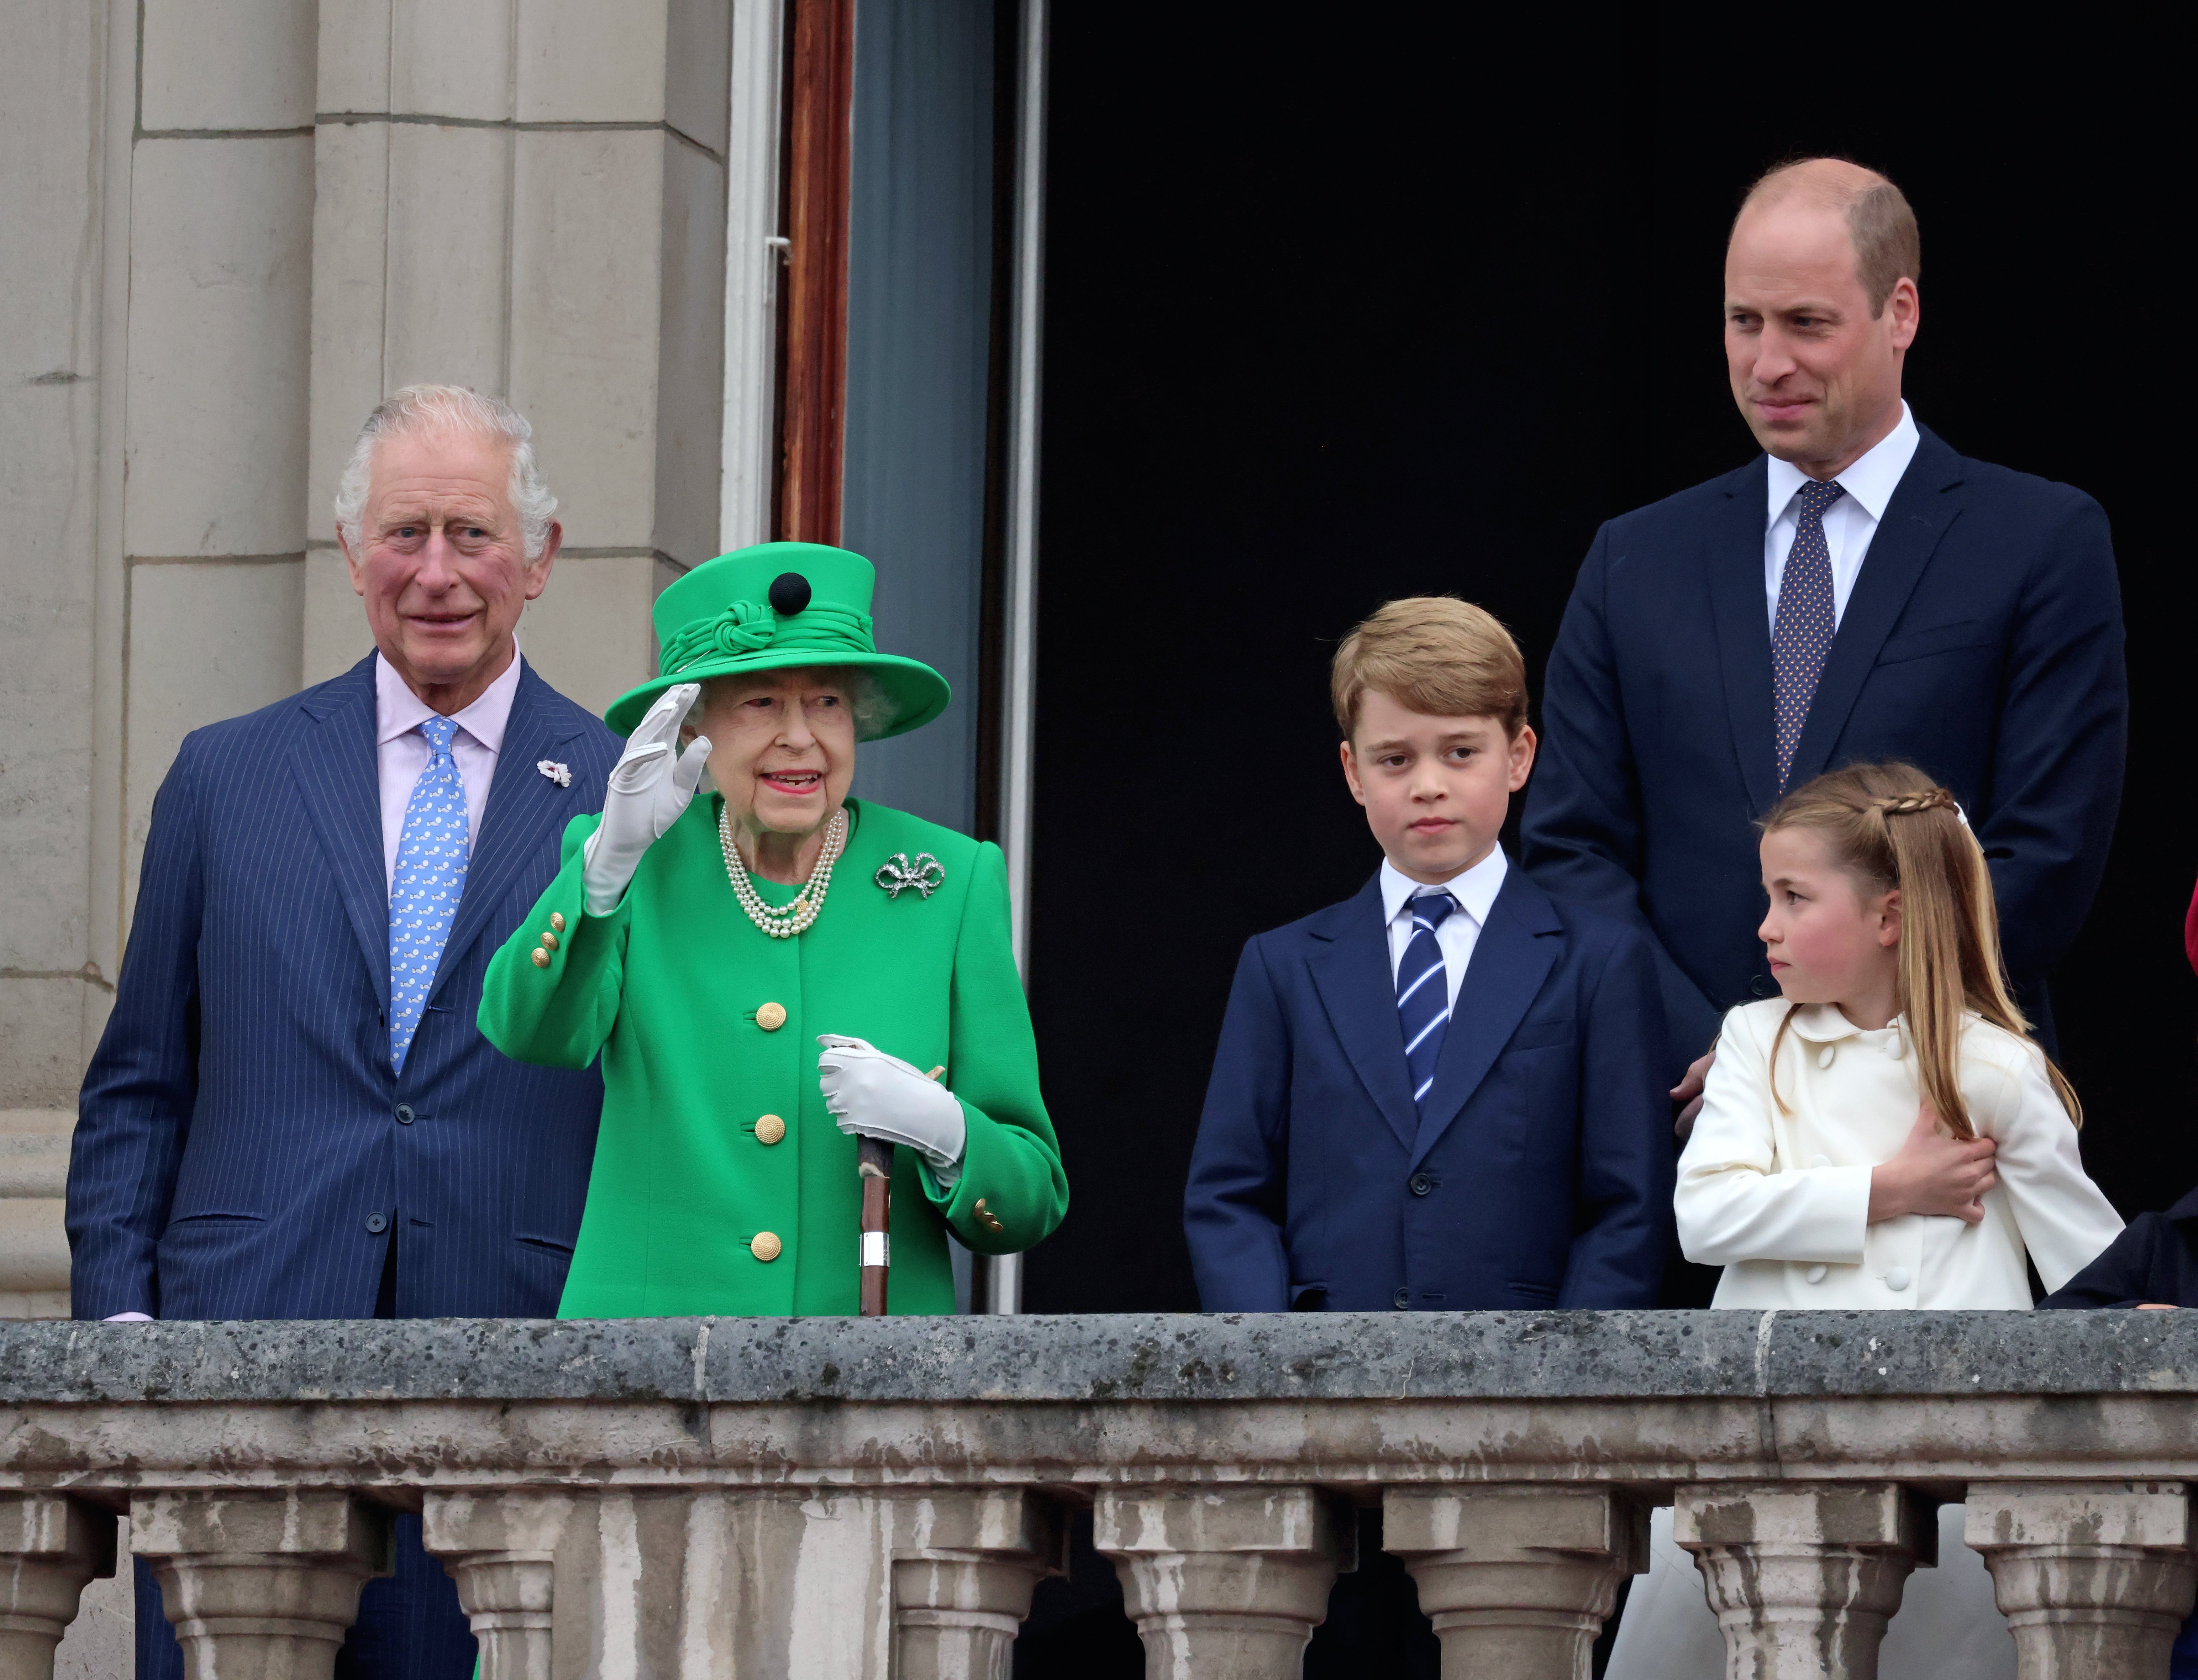 King Charles, Queen Elizabeth II, Prince George of Cambridge, Prince William and Princess Charlotte of Cambridge stand on the balcony of Buckingham Palace during the Platinum Pageant on June 05, 2022 in London, England. | Source: Getty Images